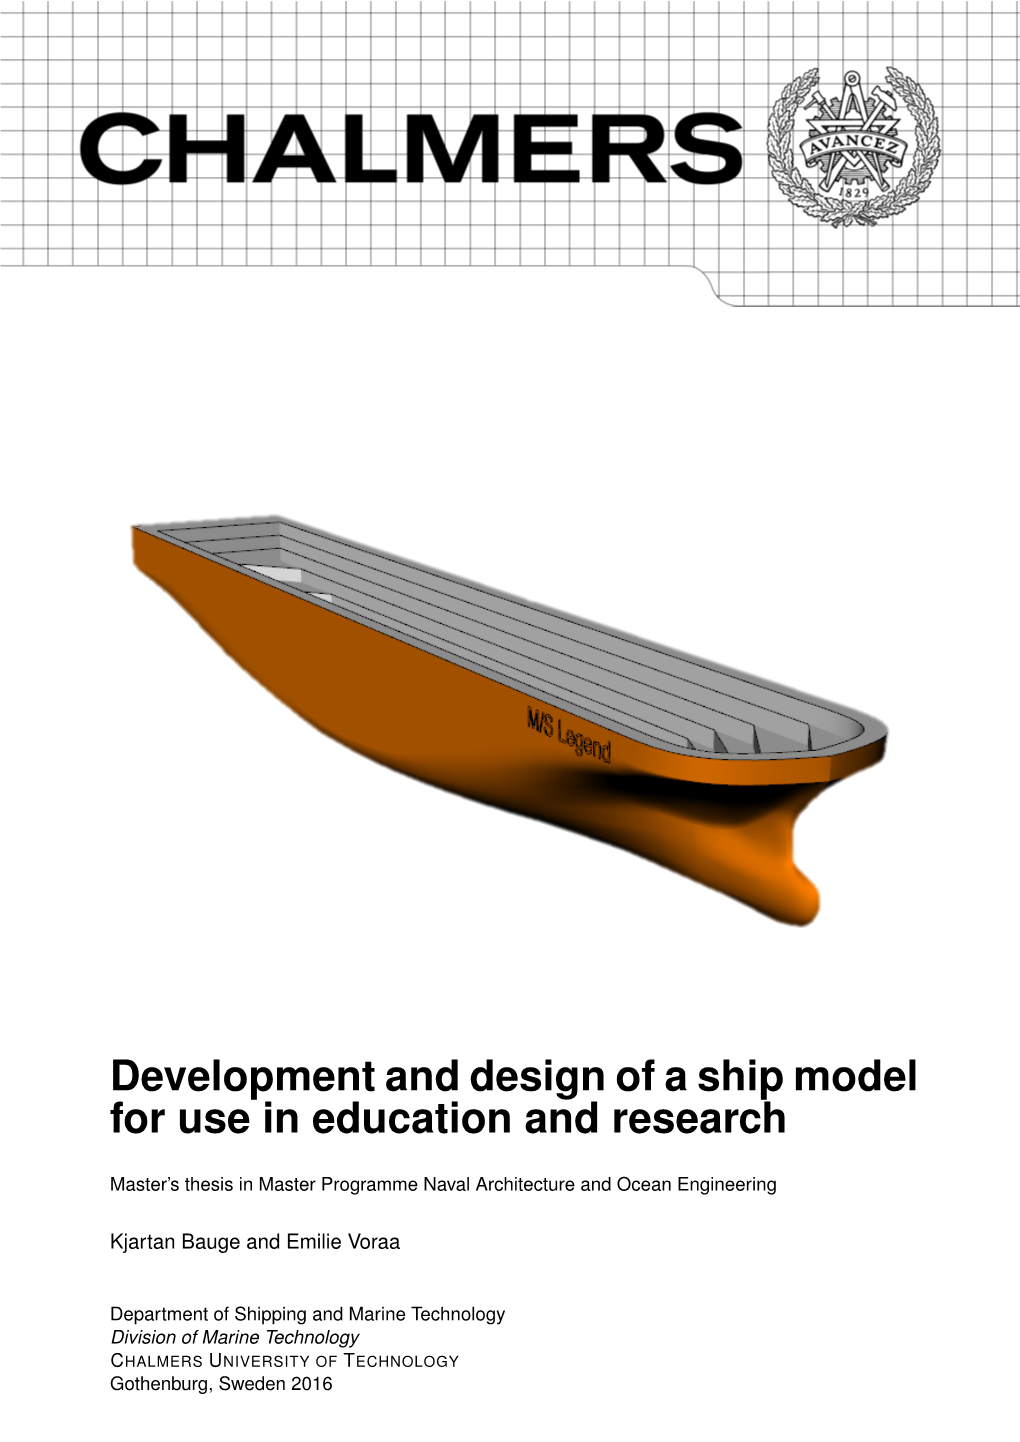 Development and Design of a Ship Model for Use in Education and Research